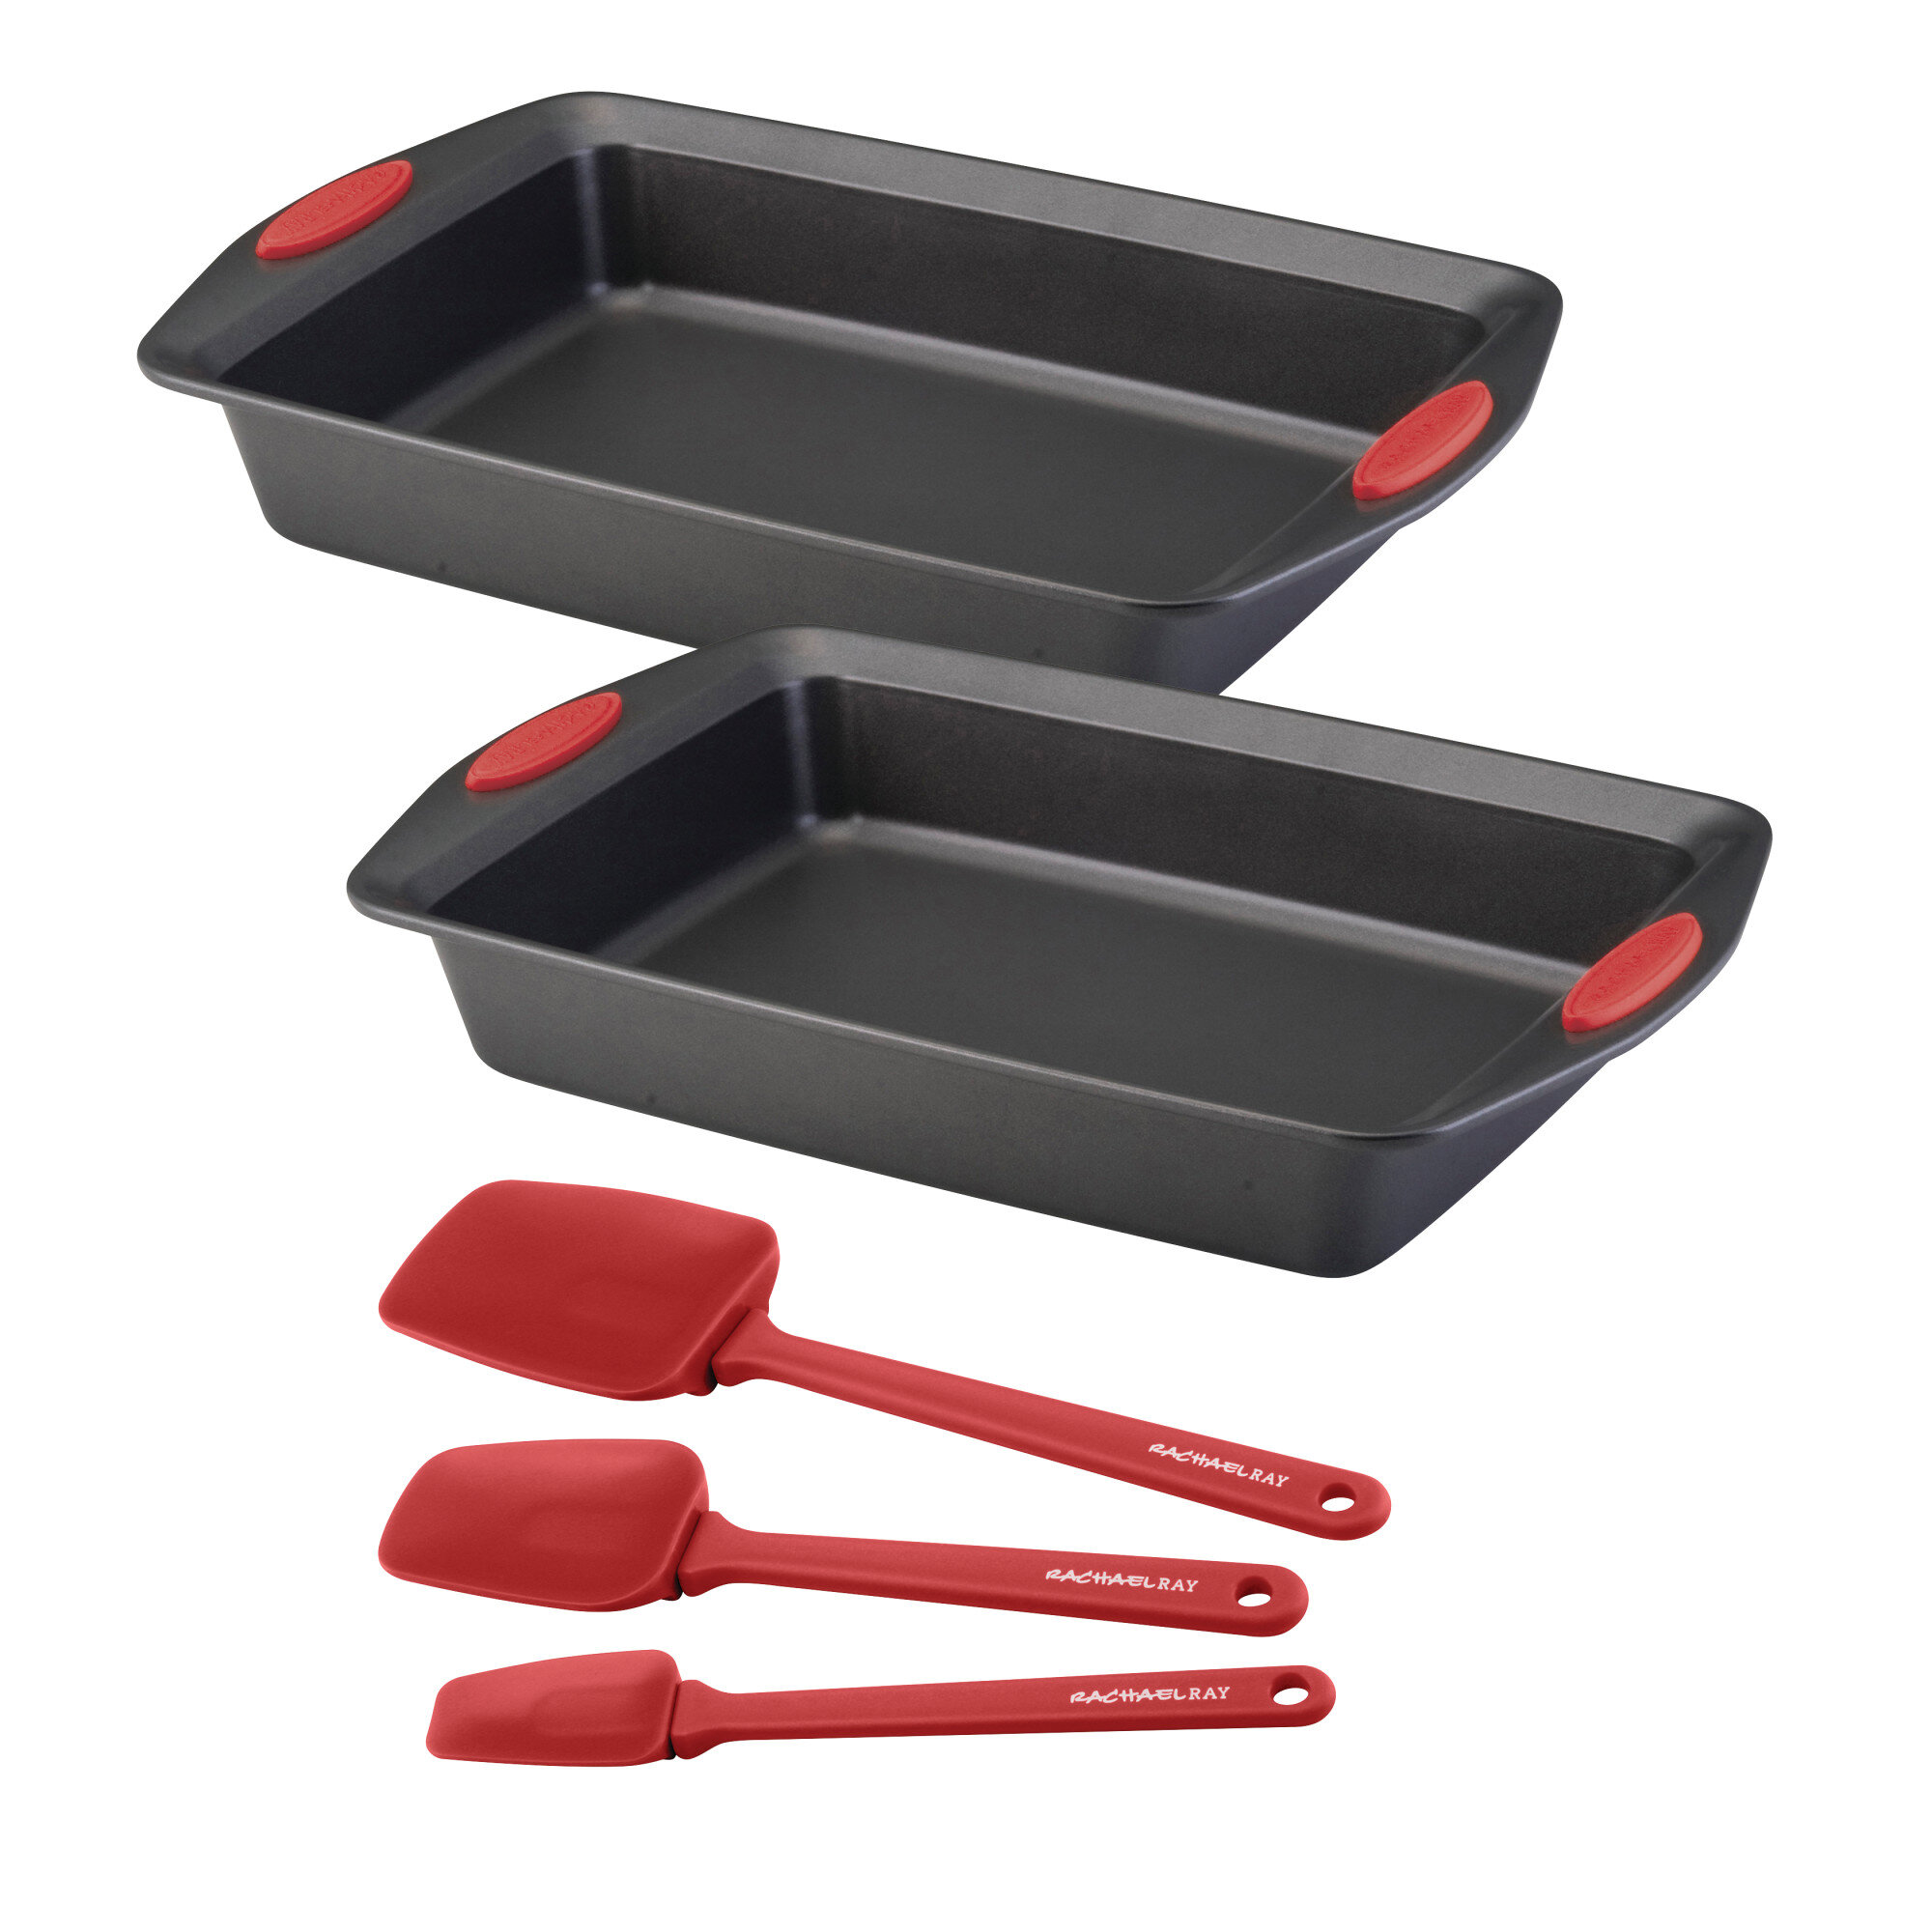 Rachael Ray Cucina Bakeware Set Includes Nonstick Cake Cookie Baking Sheet  and Muffin Cupcake Pan, 4 Piece, Latte Brown with Cranberry Red Grips